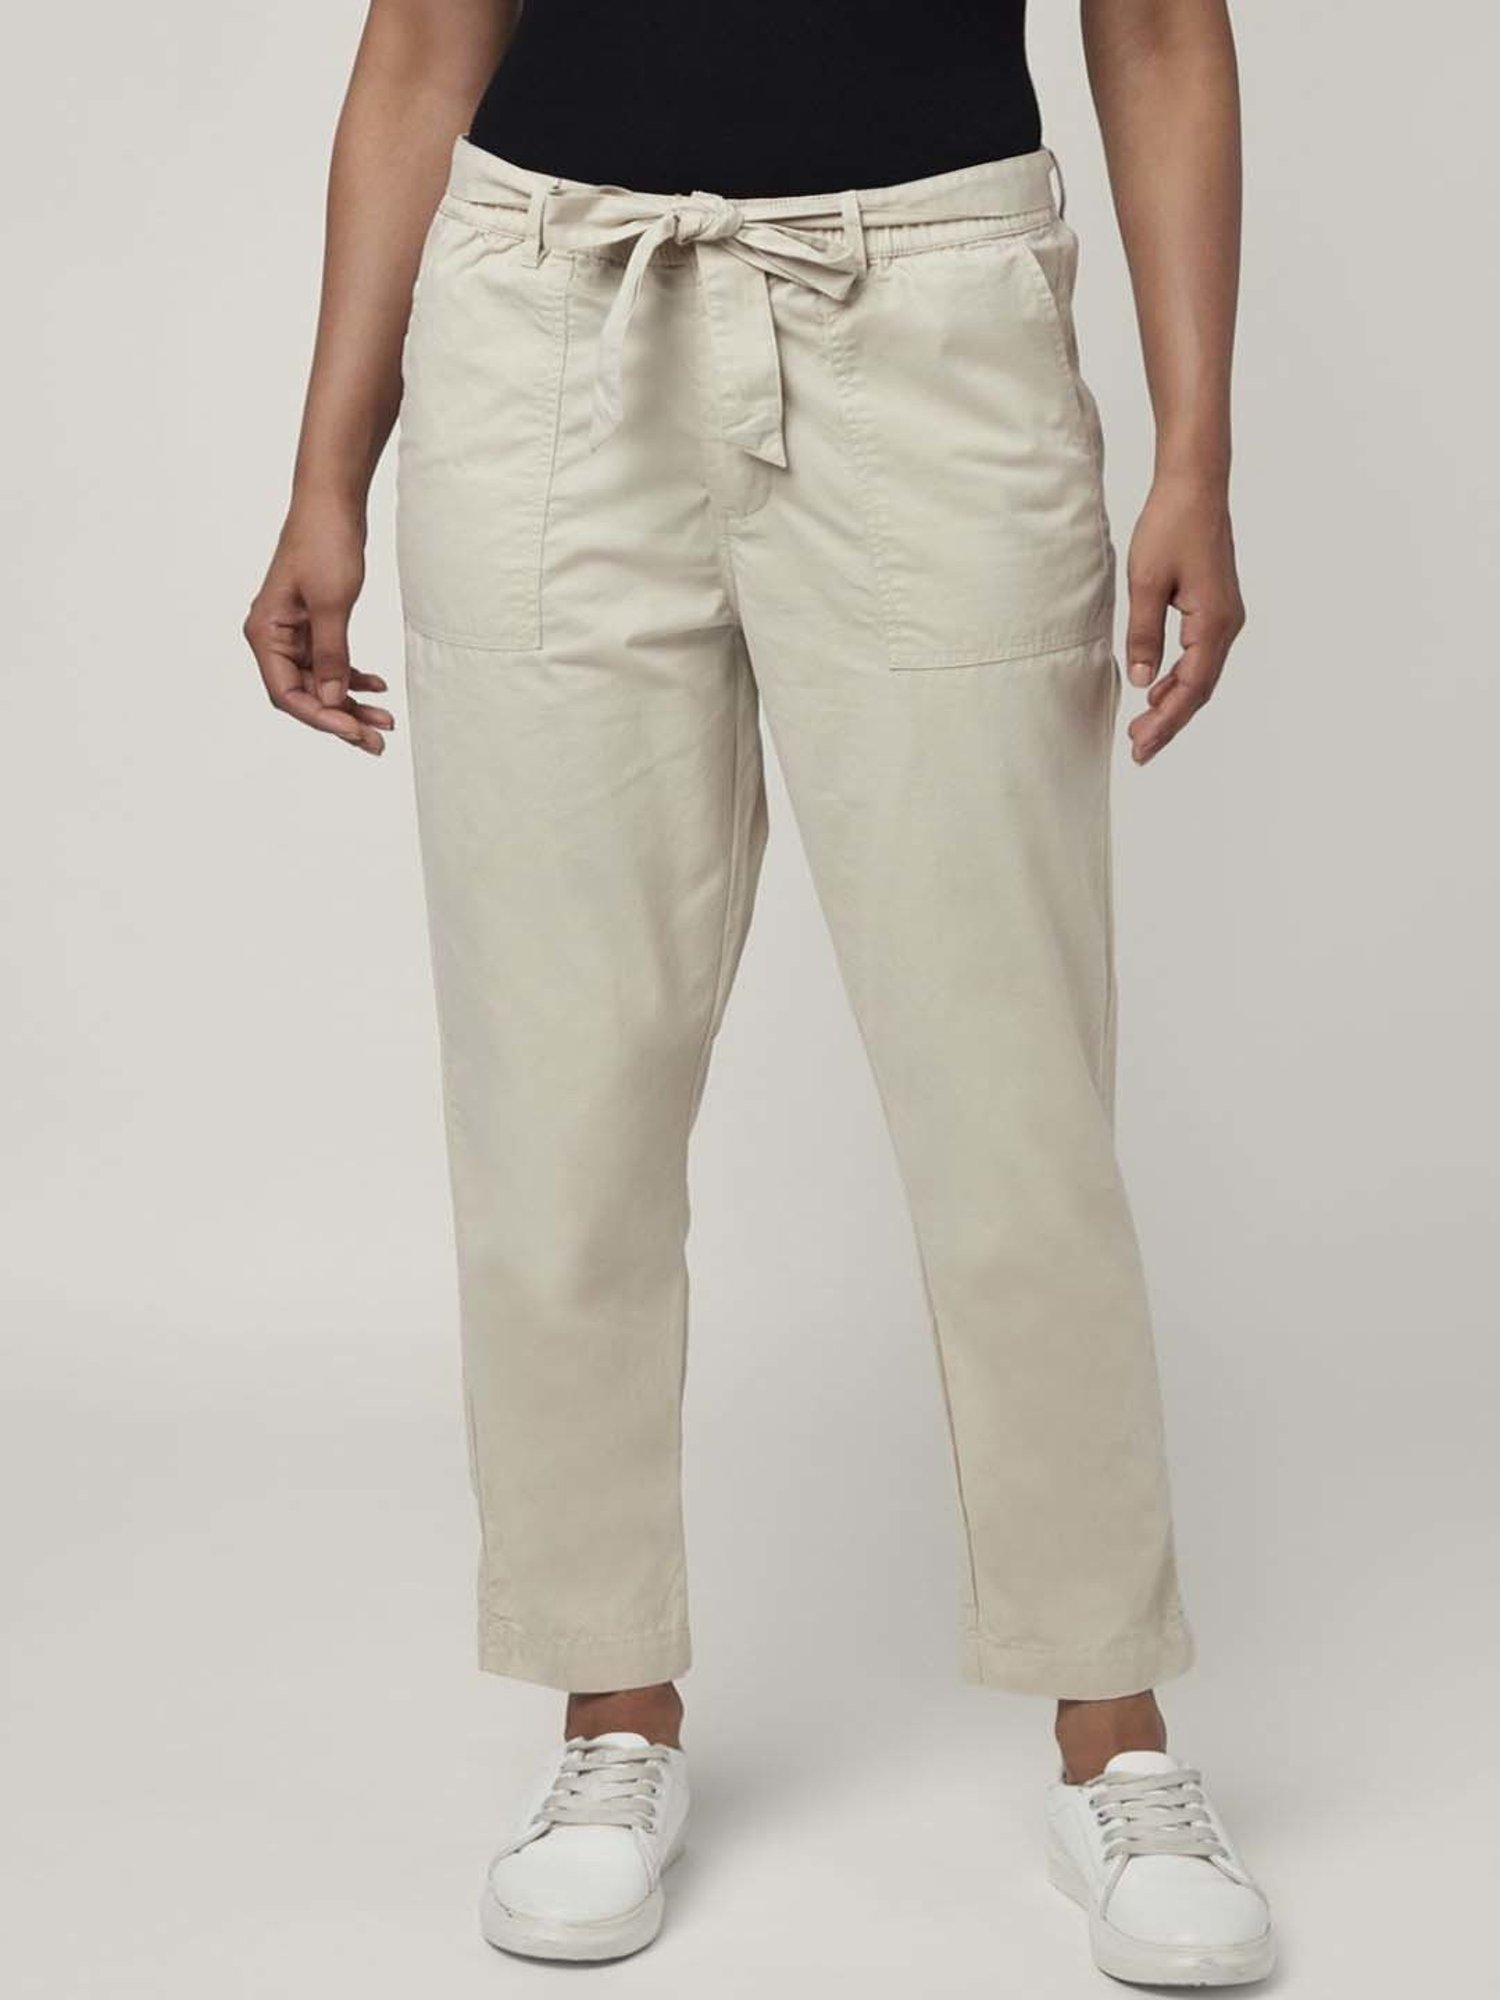 Honey By Pantaloons Regular Fit Women Grey Trousers  Buy Honey By  Pantaloons Regular Fit Women Grey Trousers Online at Best Prices in India   Flipkartcom